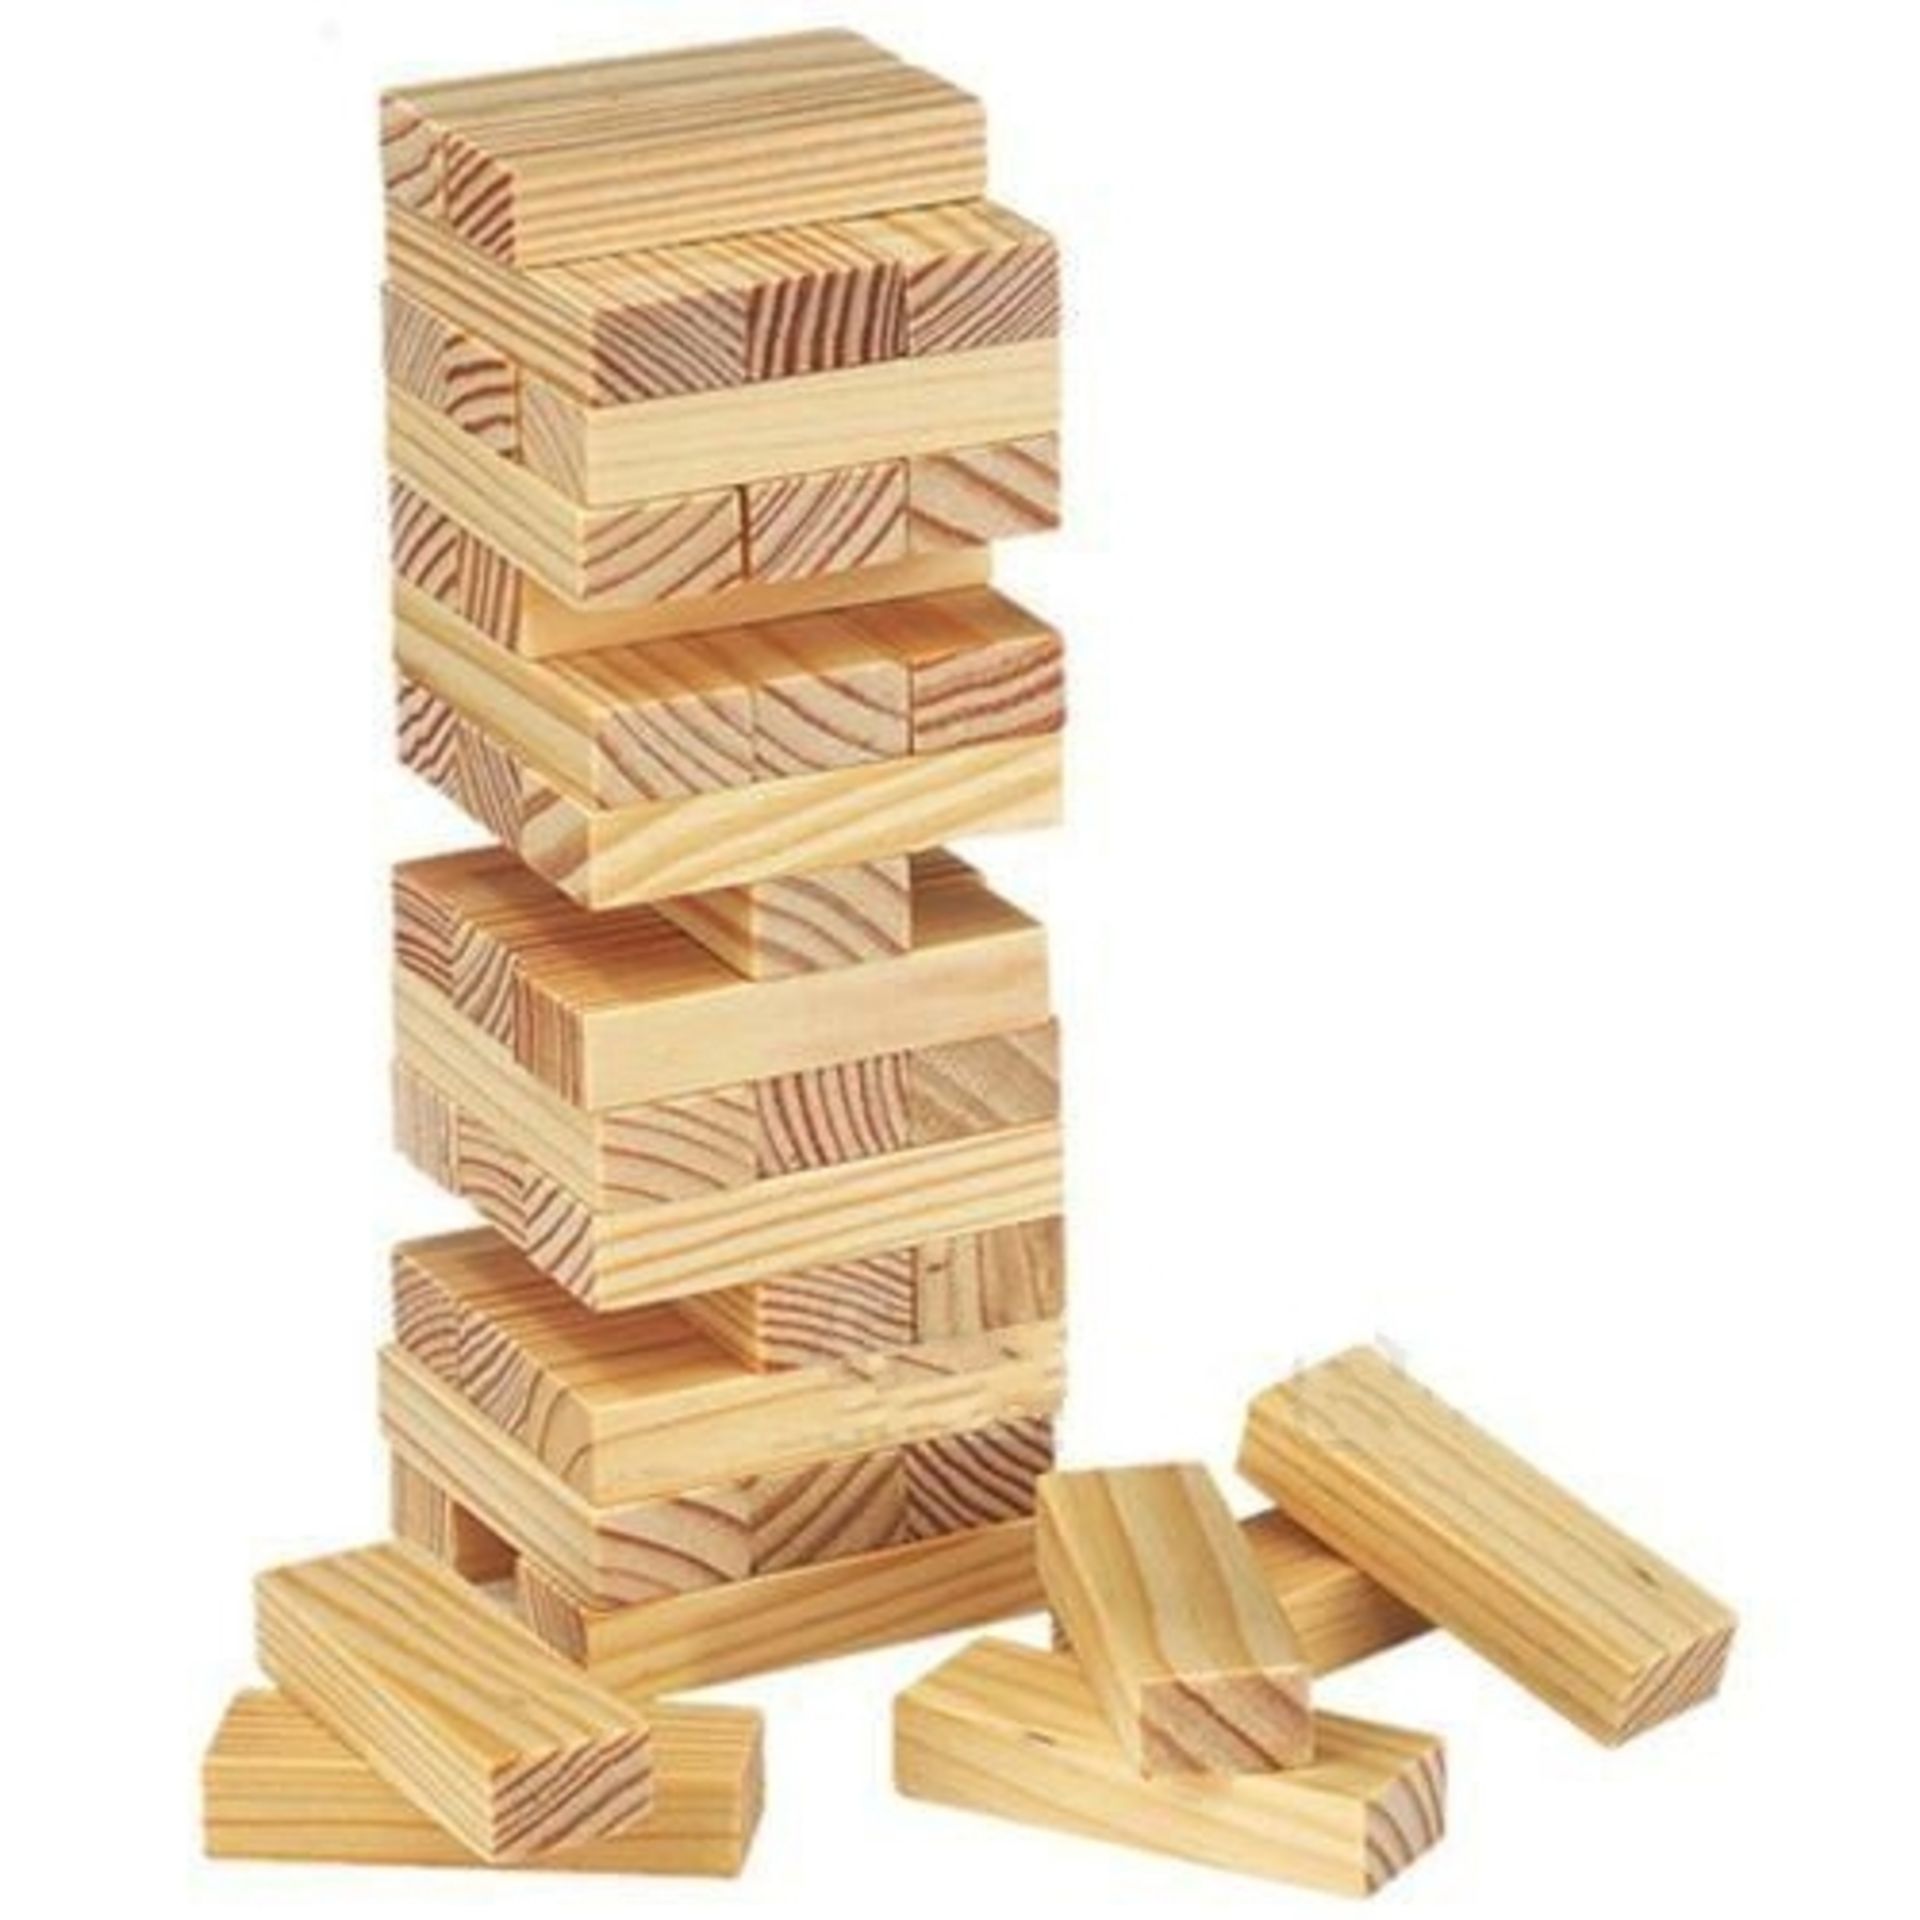 V *TRADE QTY* Brand New Quality Wooden Tower Block Game X 4 Bid price to be multiplied by Four